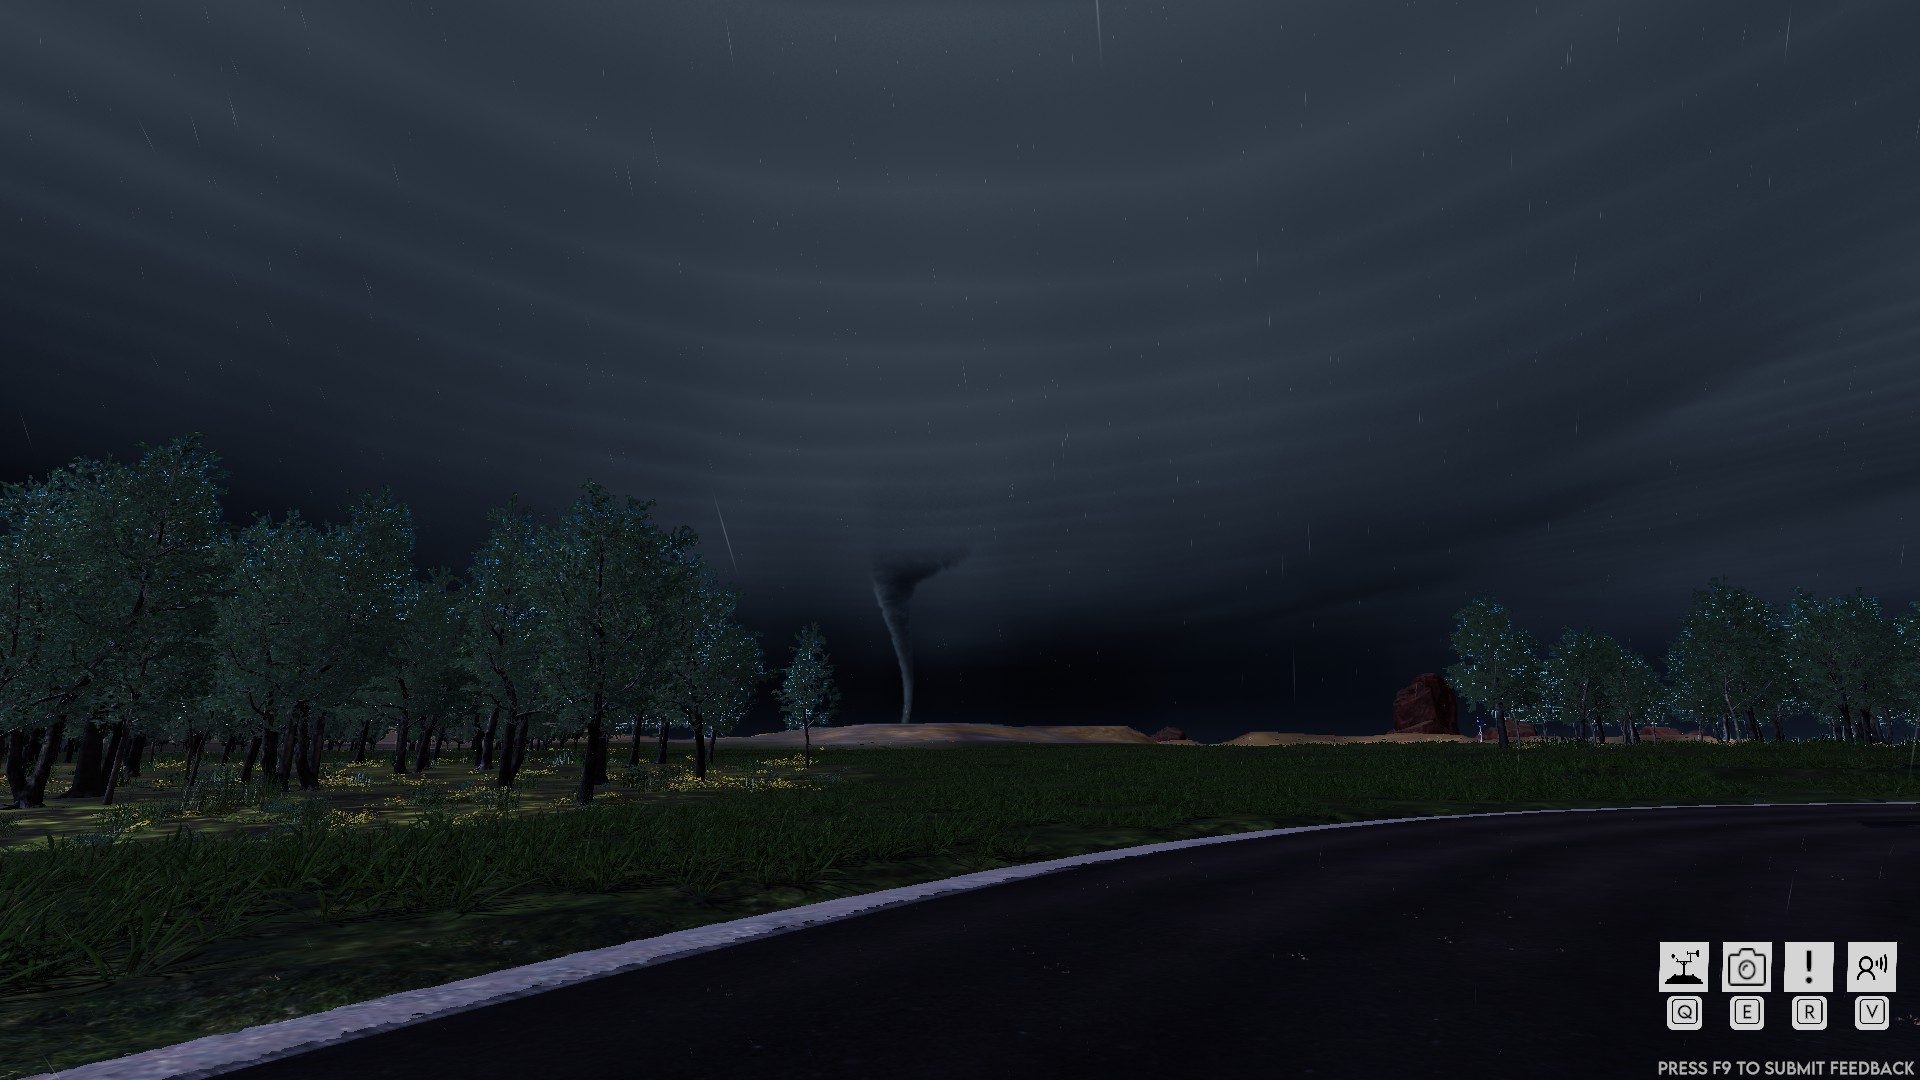 Outbrk storm chasing